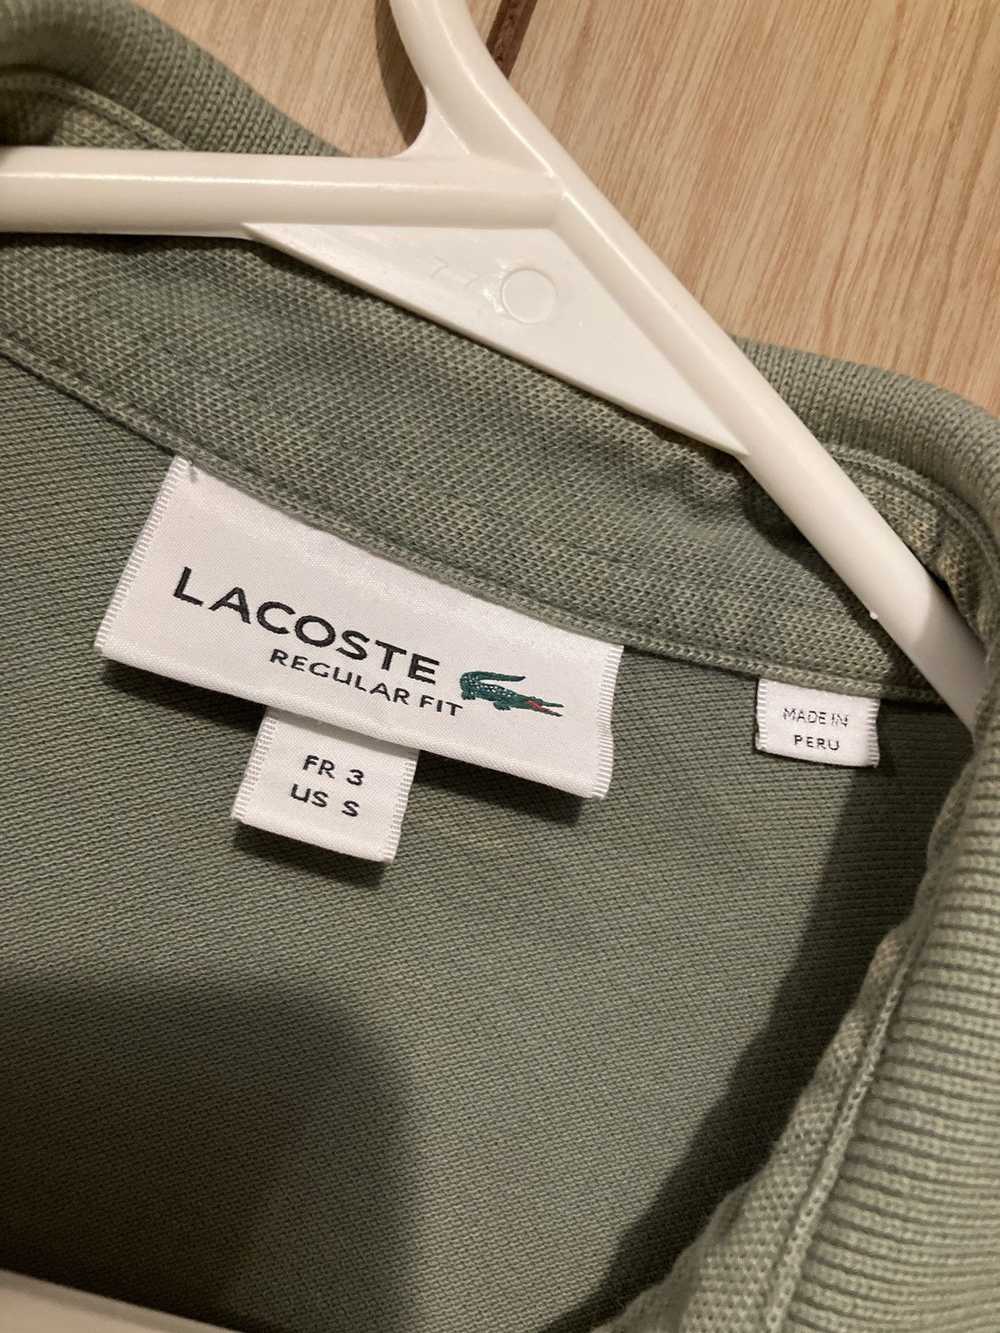 Lacoste Lacoste Polo Shirt. Small - image 4